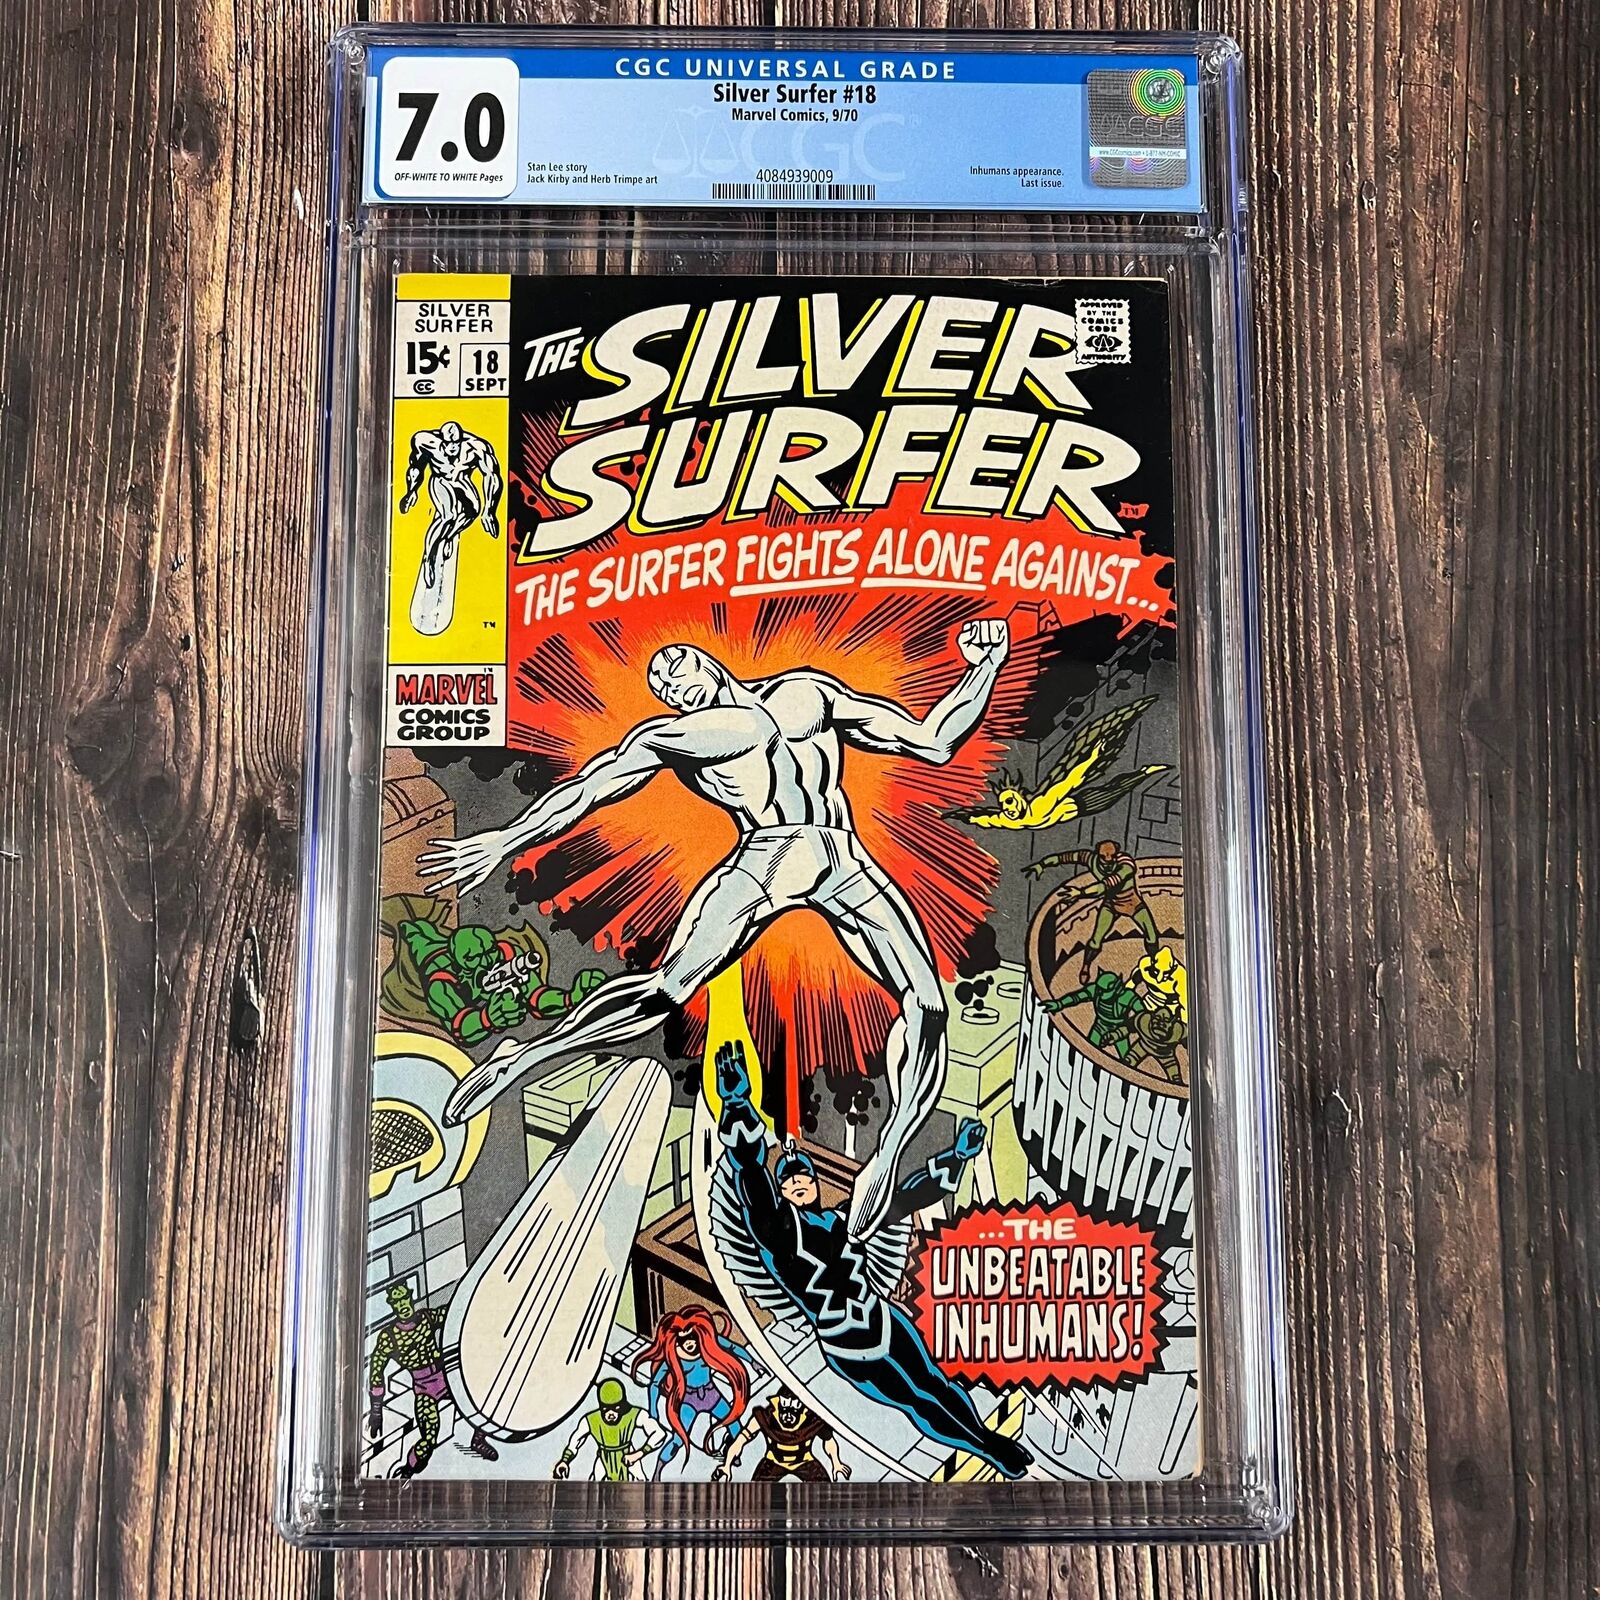 Silver Surfer #18 CGC 7.0 Cert 9009, First battle of the Silver Surfer vs the In